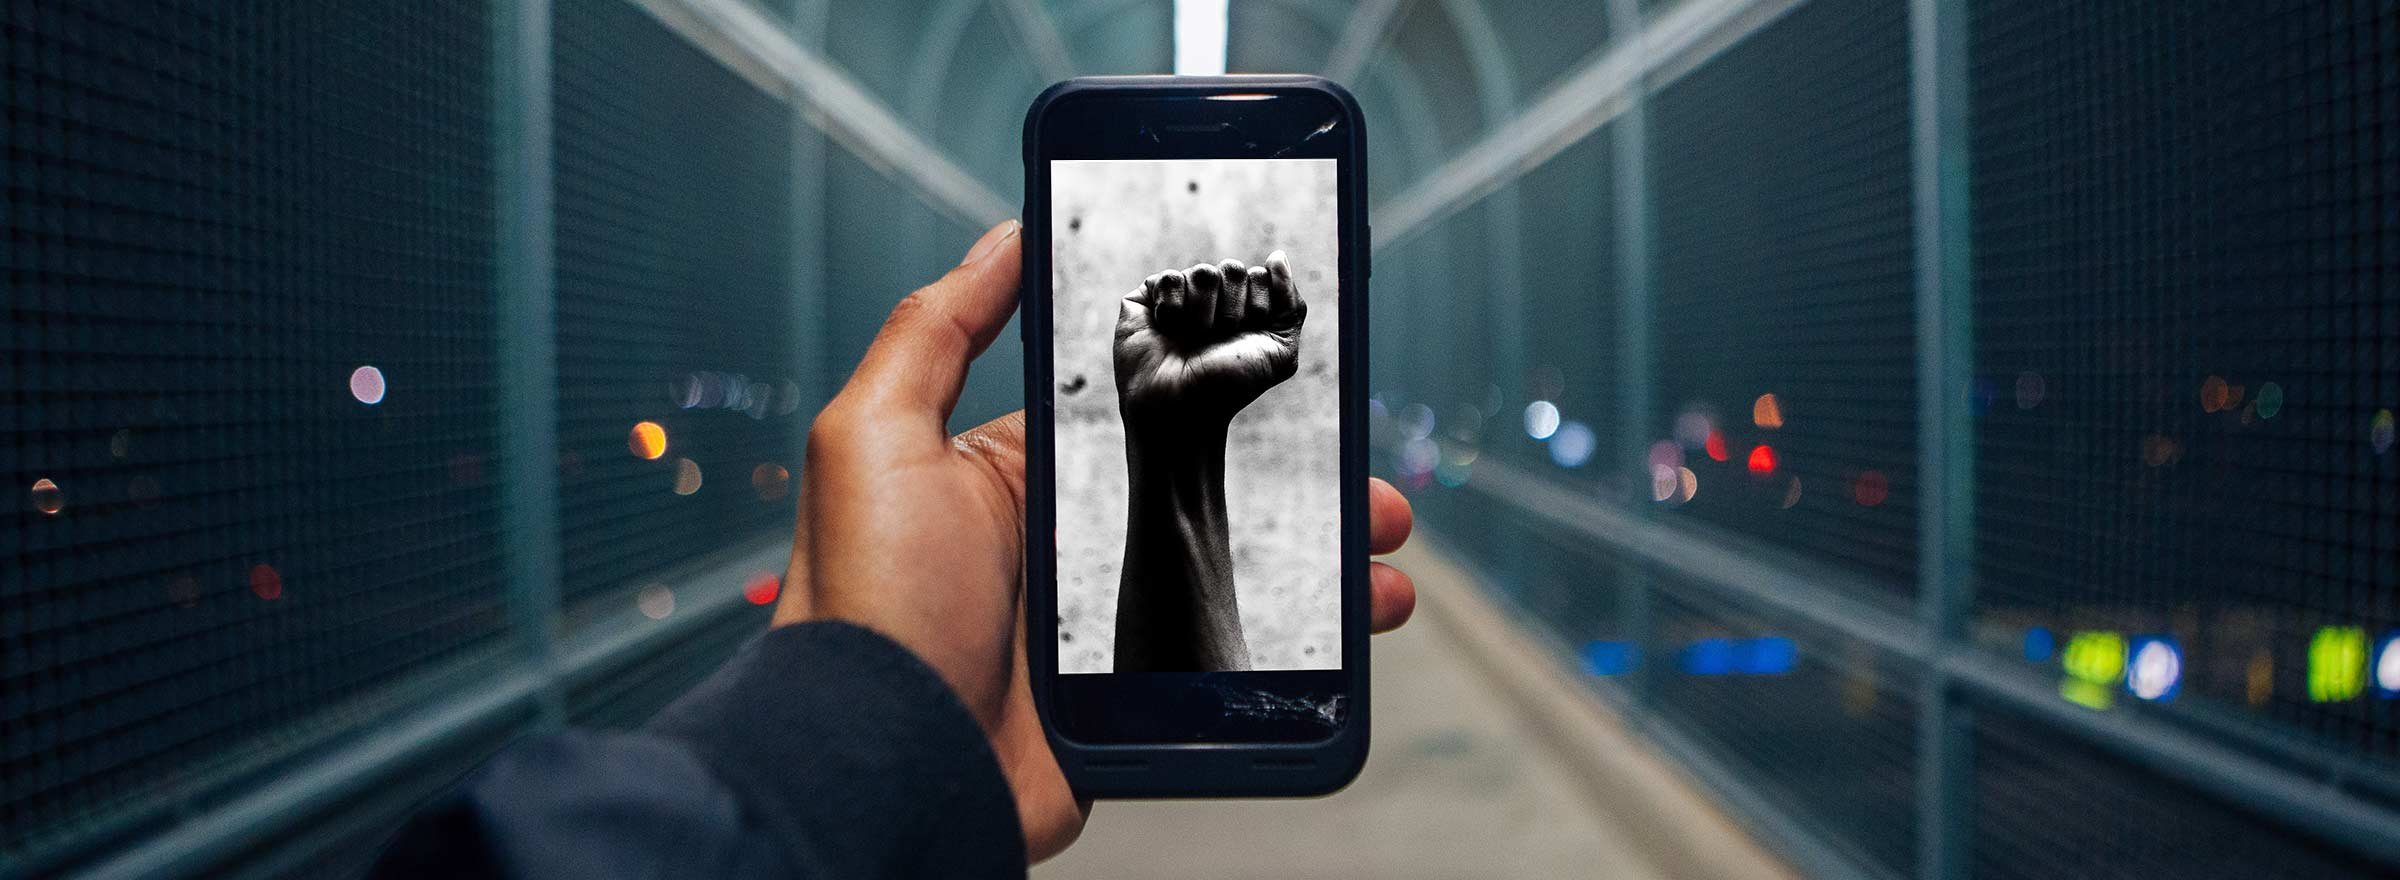 person looking at an image of a raised fist on a phone, symbolizing how public good app house is empowering positive social change